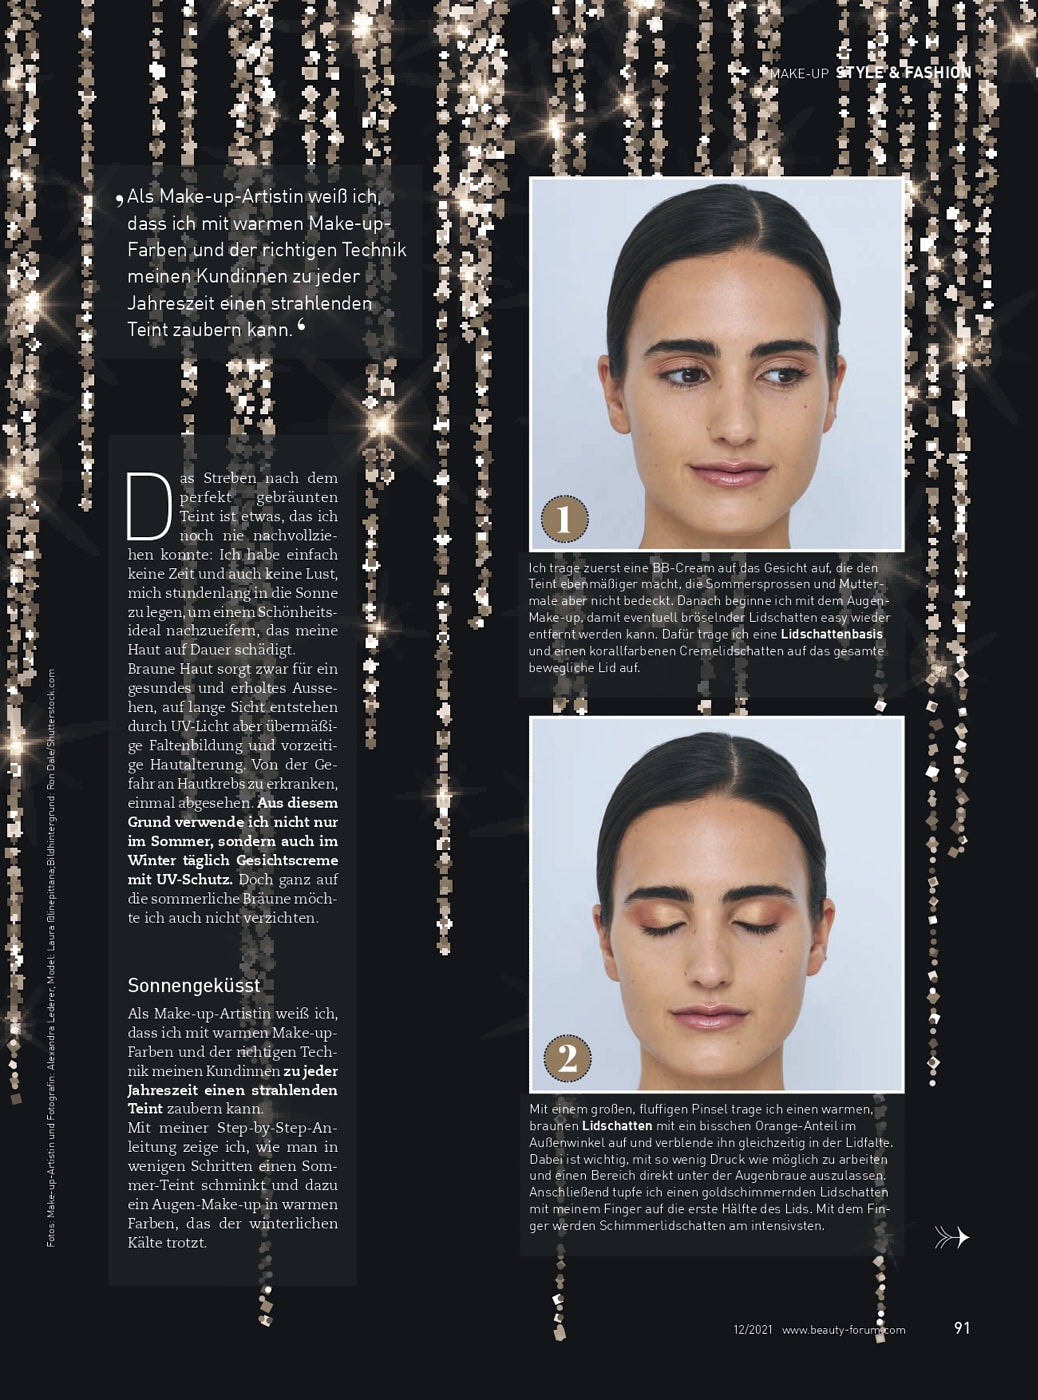 Beauty Forum Magazin Step-by-step